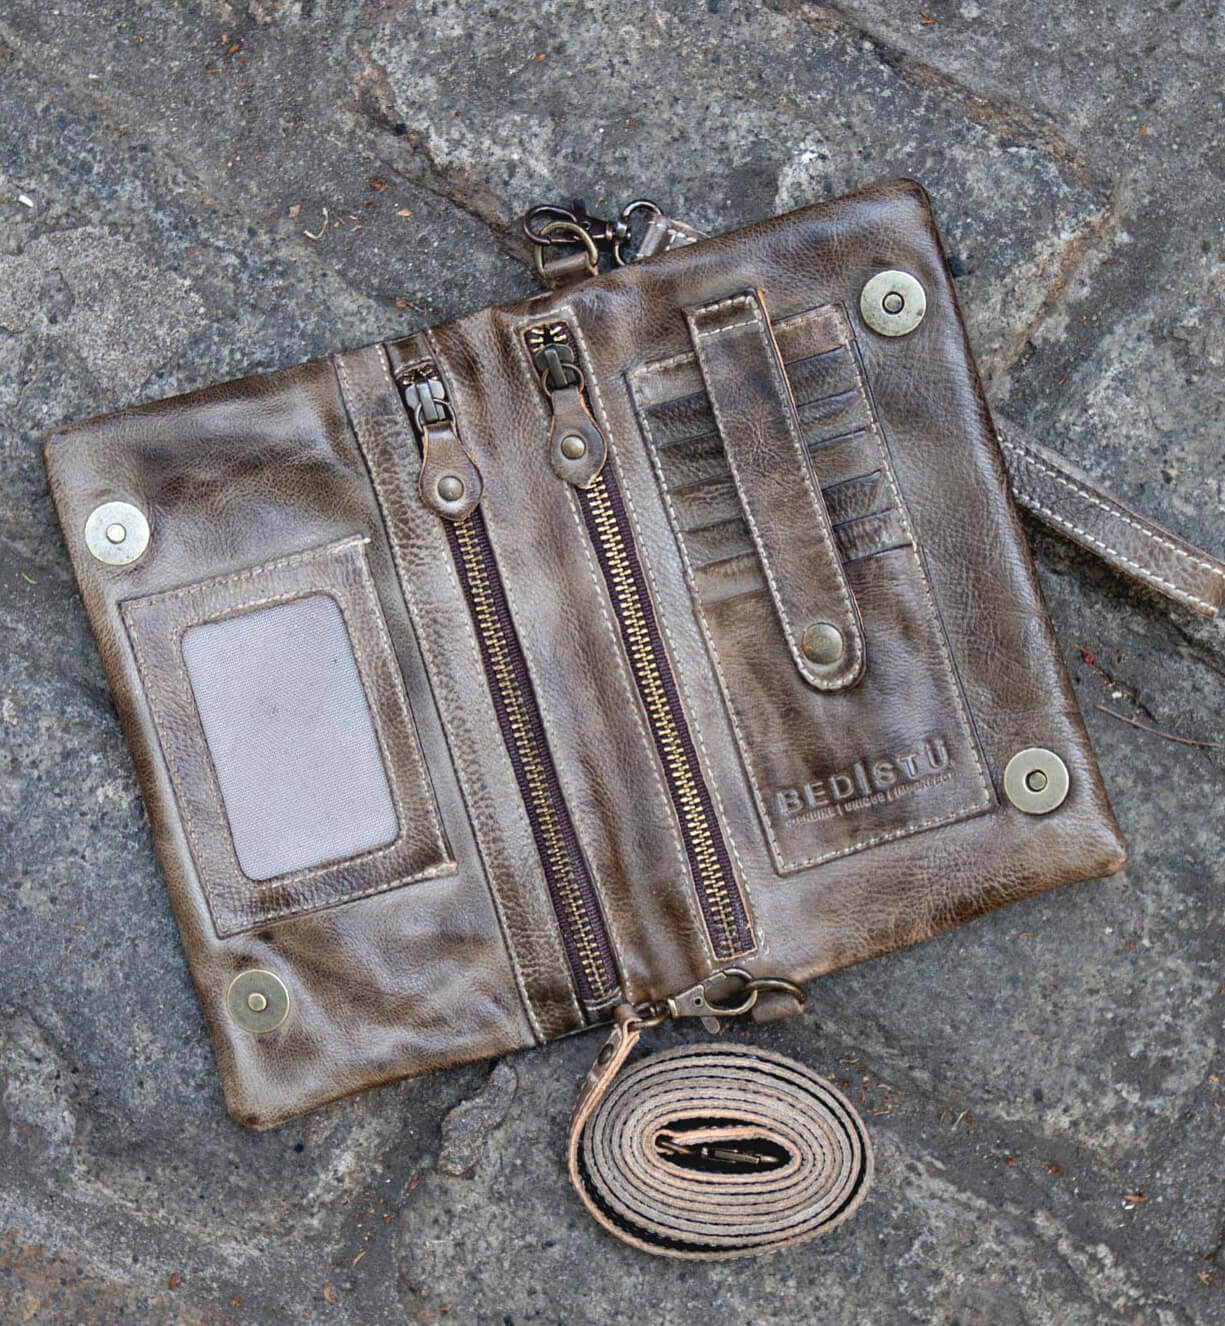 A brown leather Cadence wallet by Bed Stu laying on the ground.